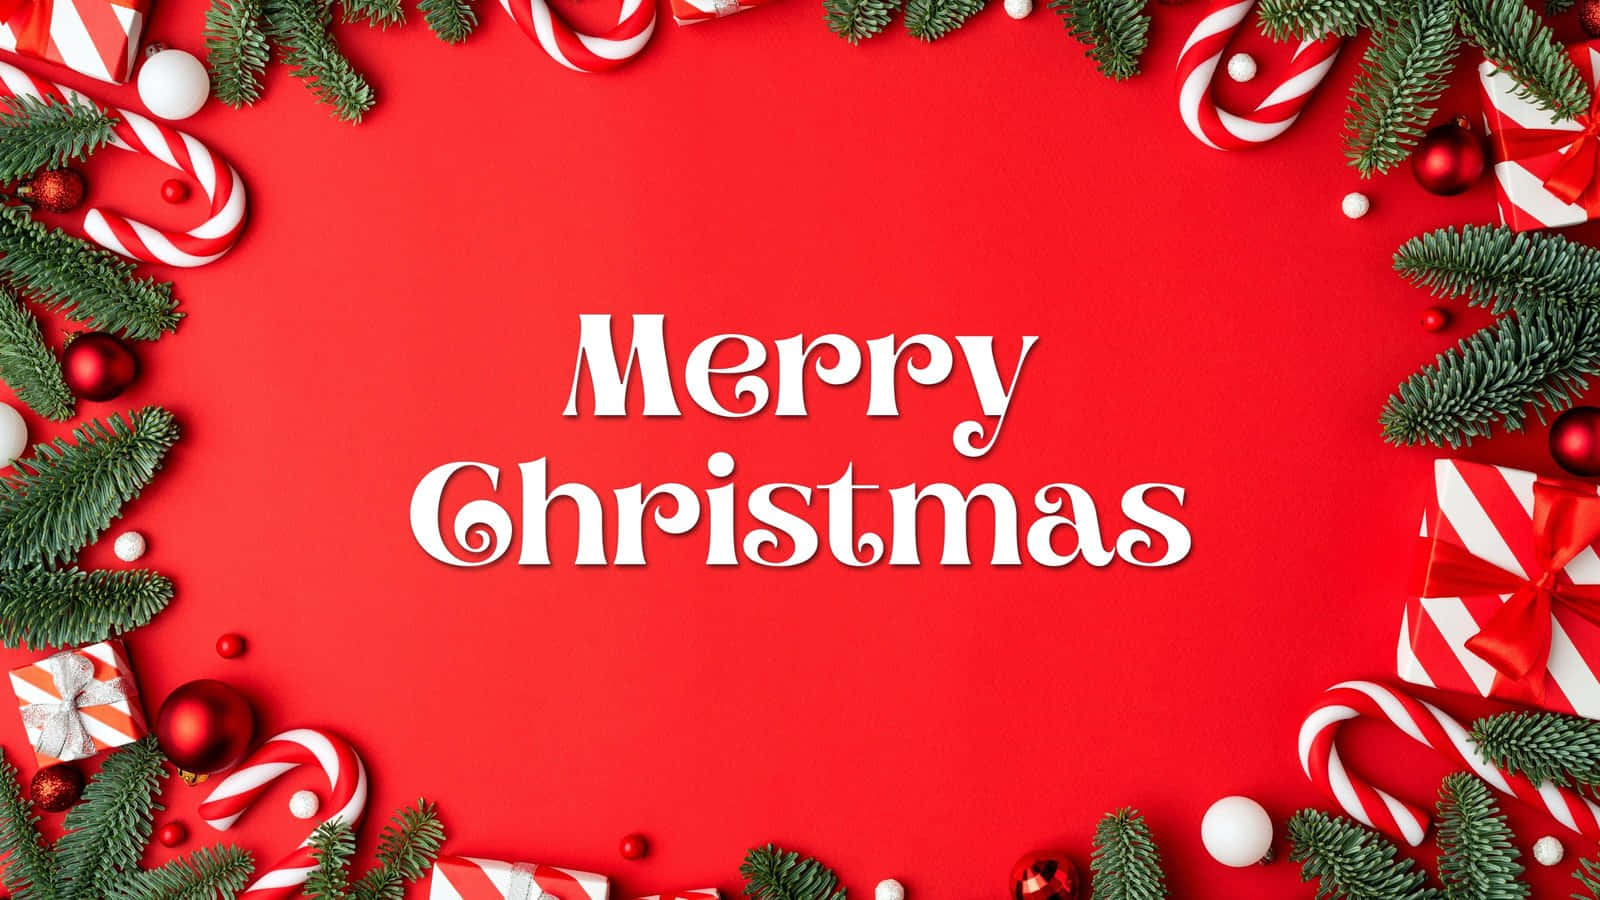 Festive Christmas Greeting Red Background Wallpaper